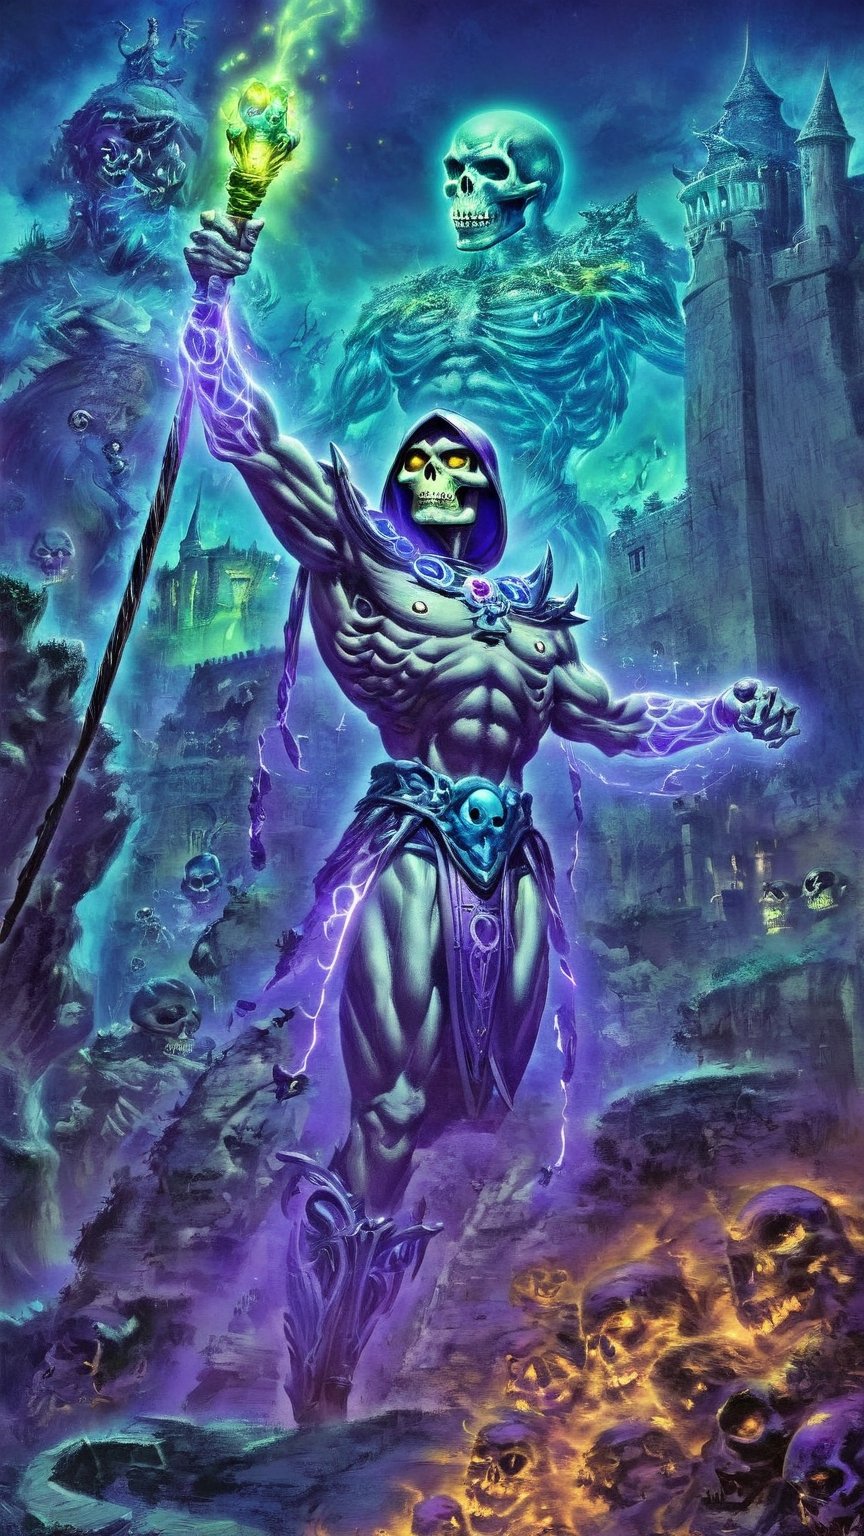 One male, Skeletor, Masters of the Universe, ran skull staff, purple aura, fire, world, soul, darkness, castle greyskull, black, fear, thorny face,dark anime,vintage_p_style, 16k, high definition, HDR, neon colors